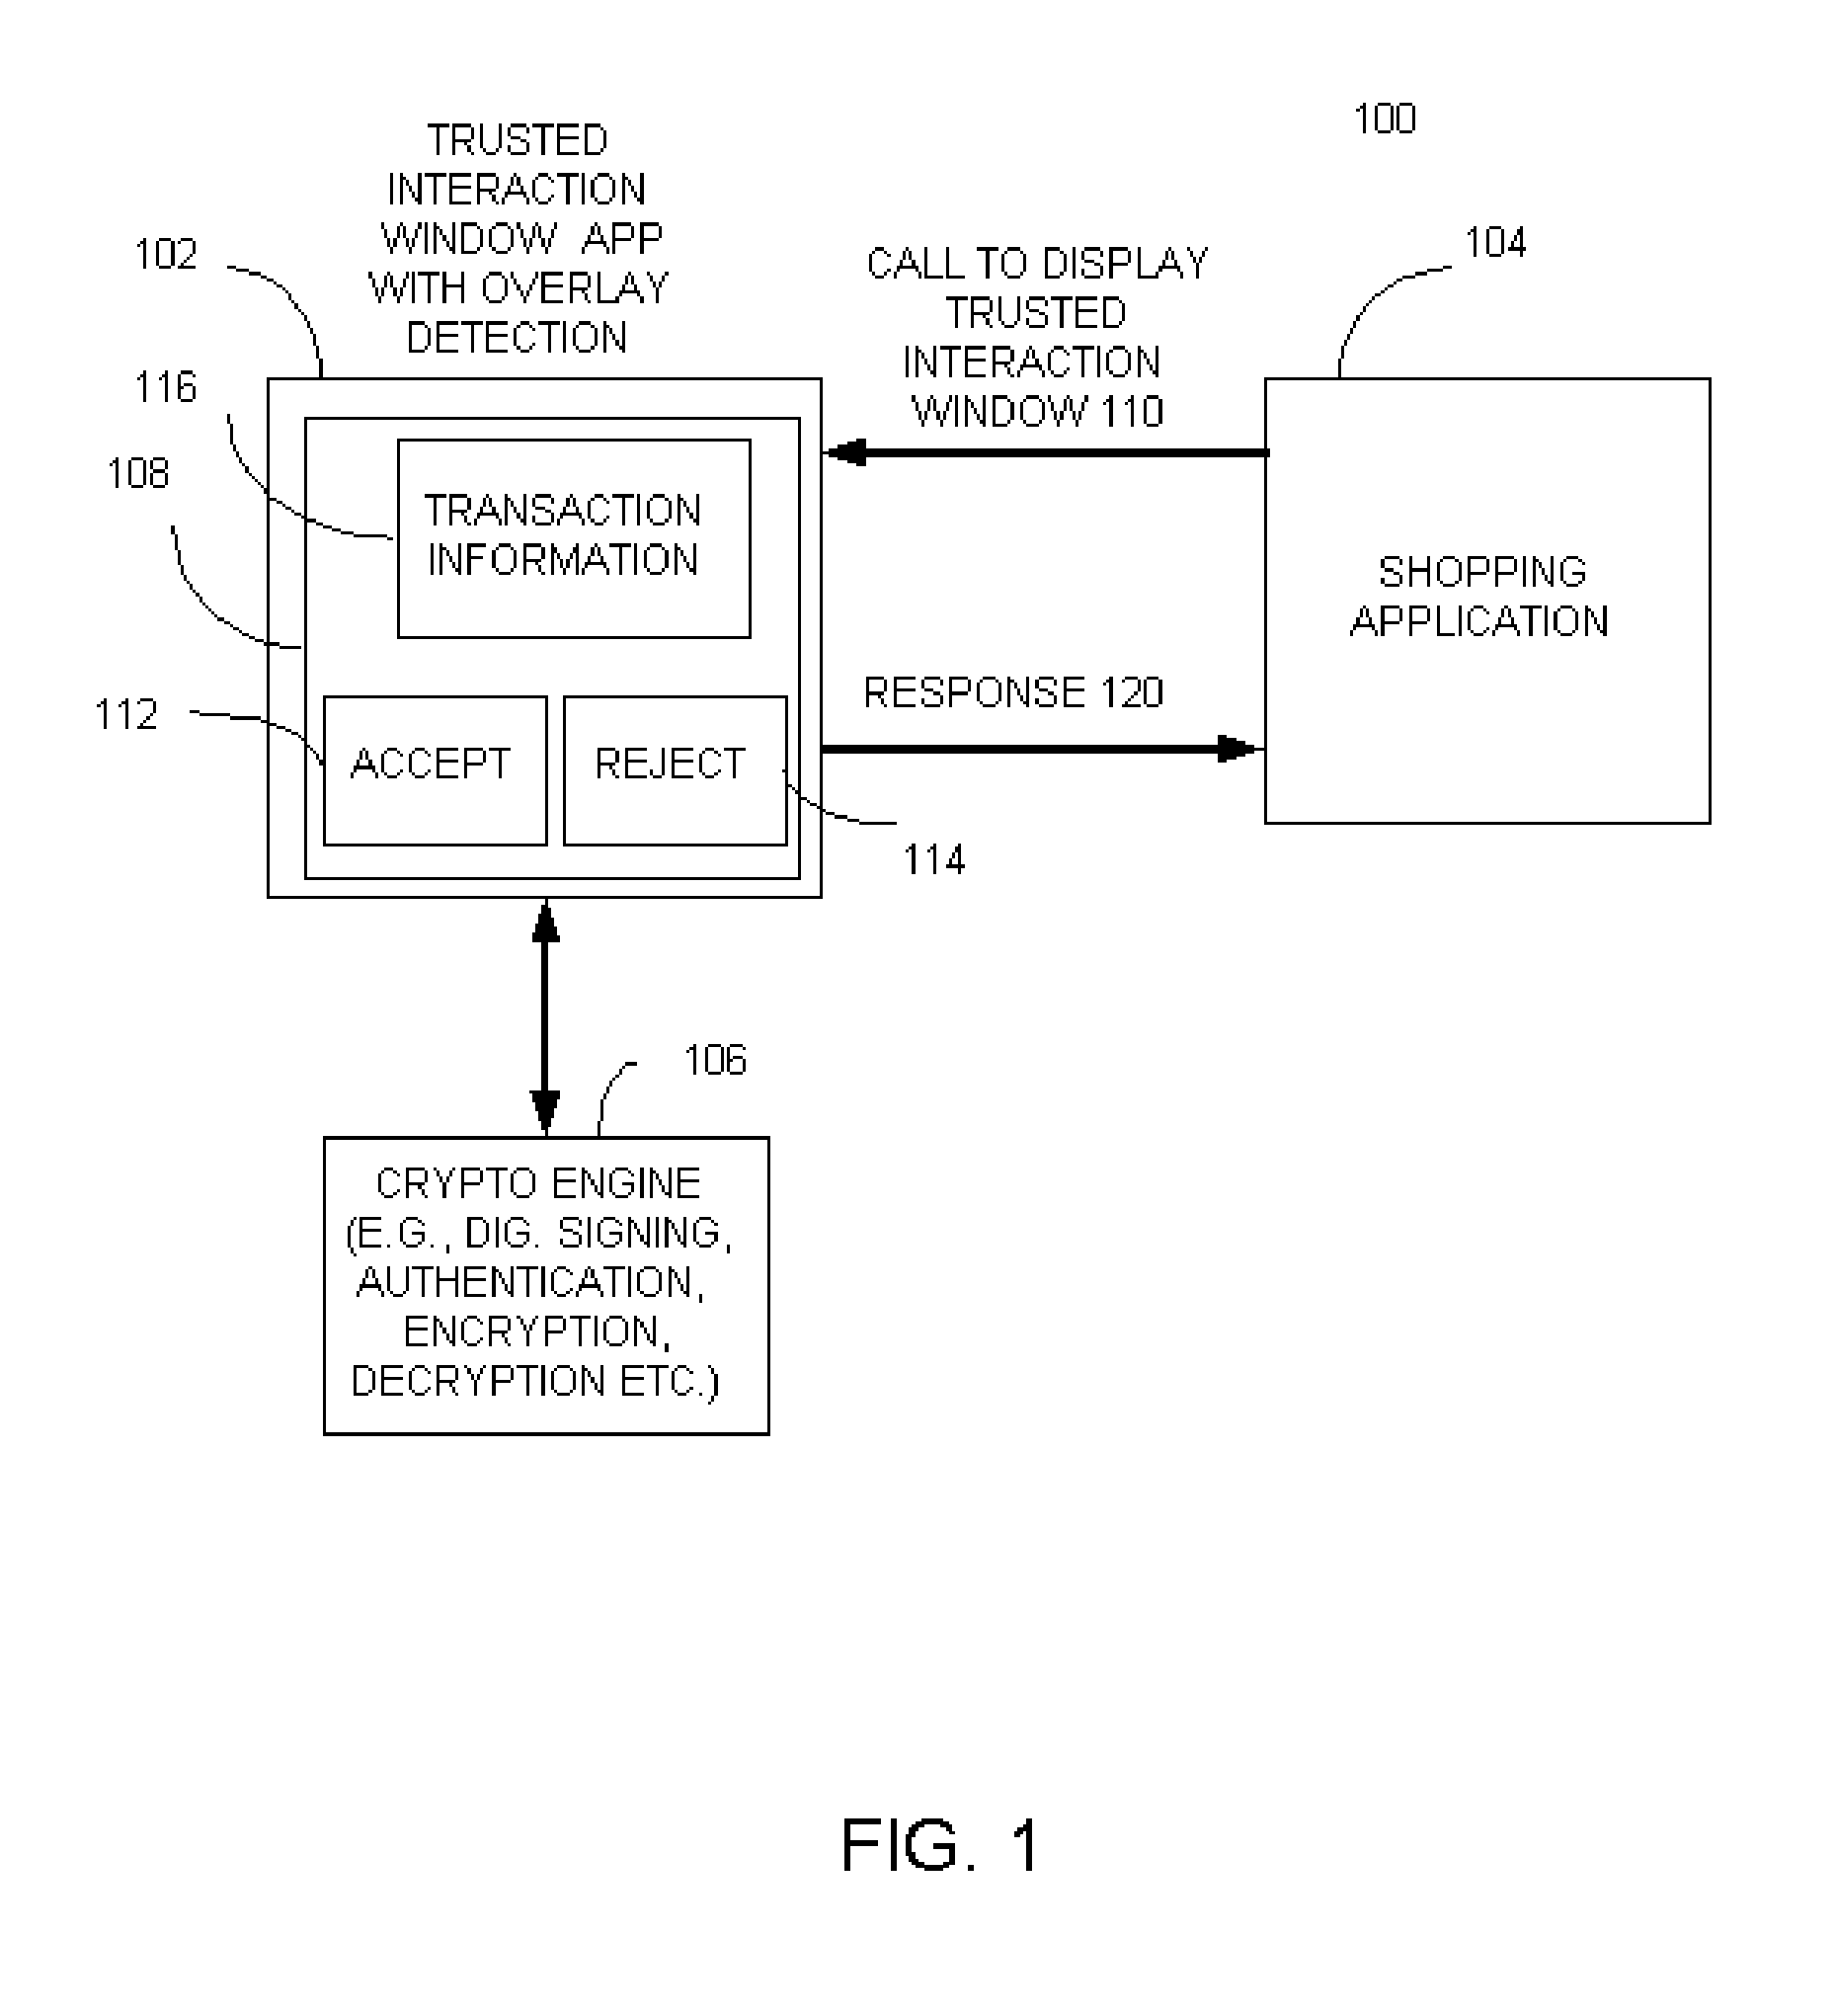 Method and apparatus for protecting communication of information through a graphical user interface